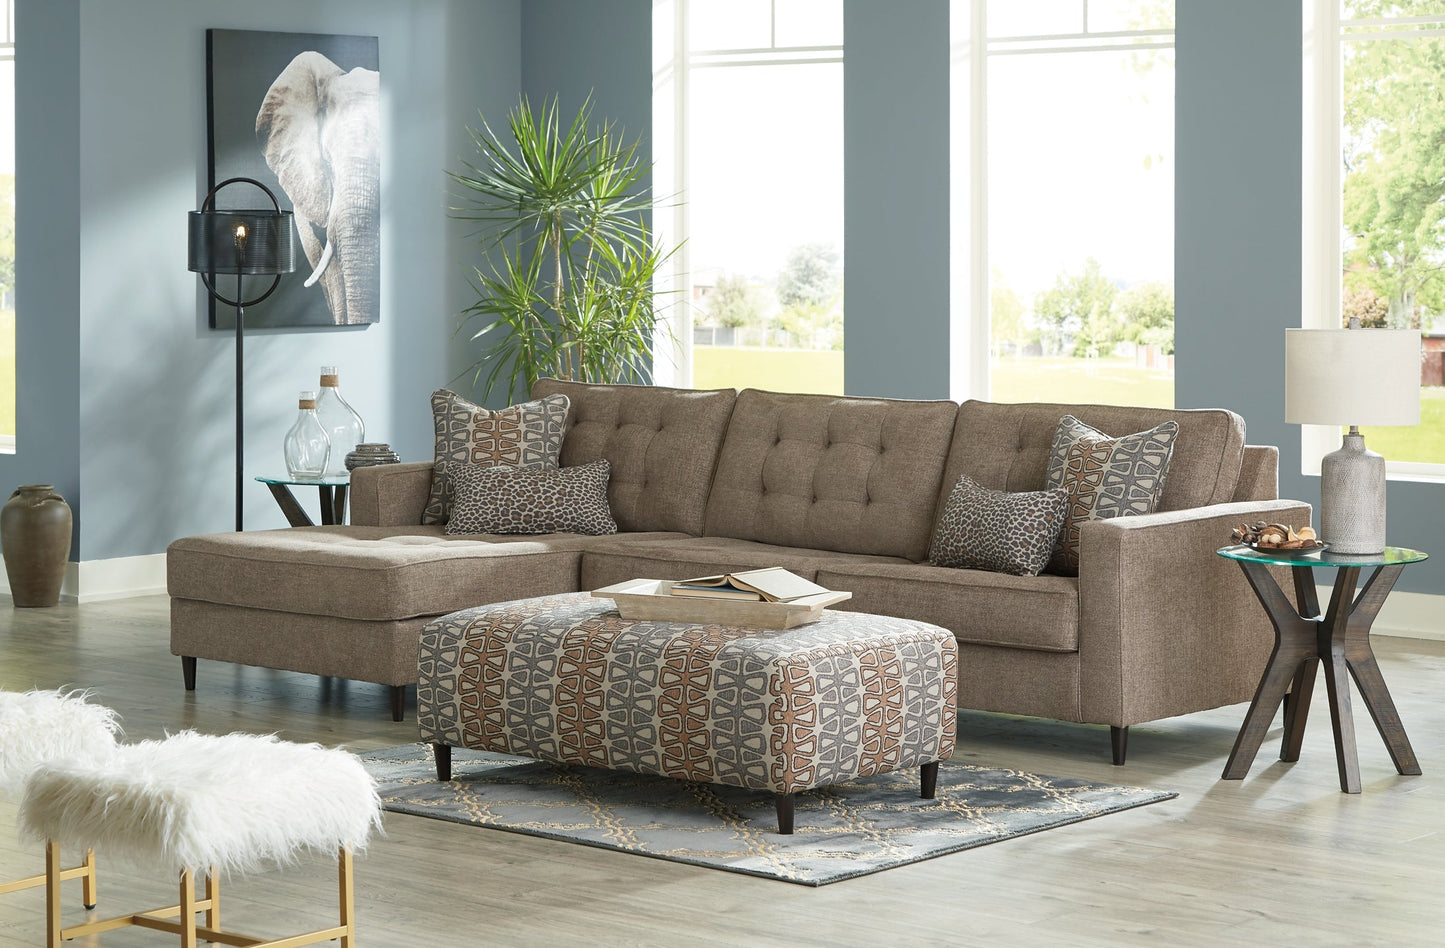 Flintshire 2-Piece Sectional with Ottoman at Cloud 9 Mattress & Furniture furniture, home furnishing, home decor